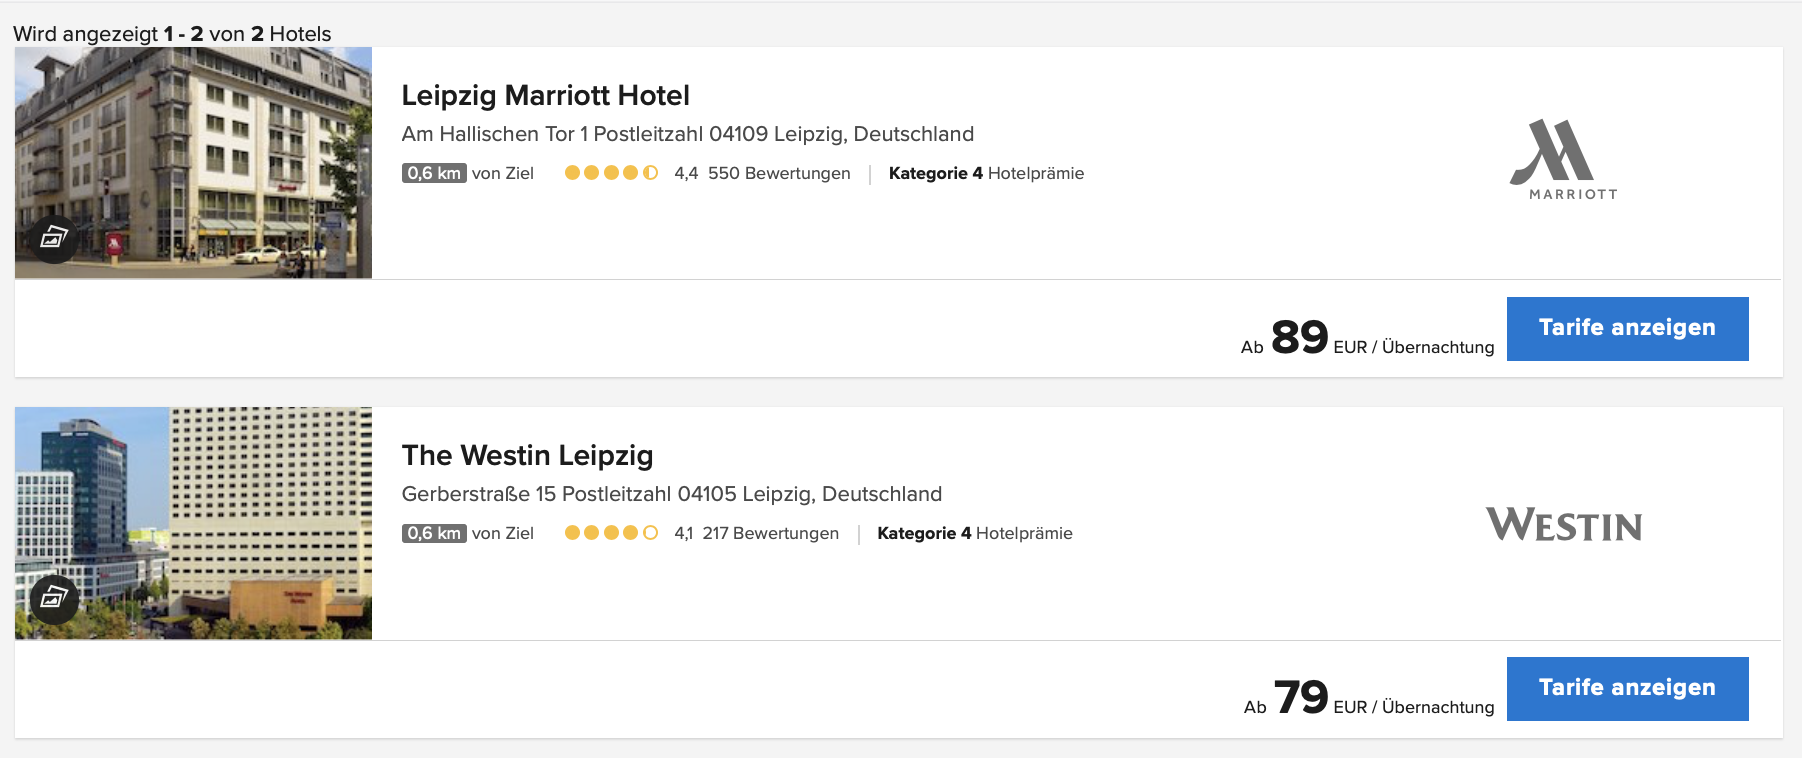  Review Marriott Leipzig Hotel Buchung The Westin Leipzig oder Marriott Leipzig Hotel